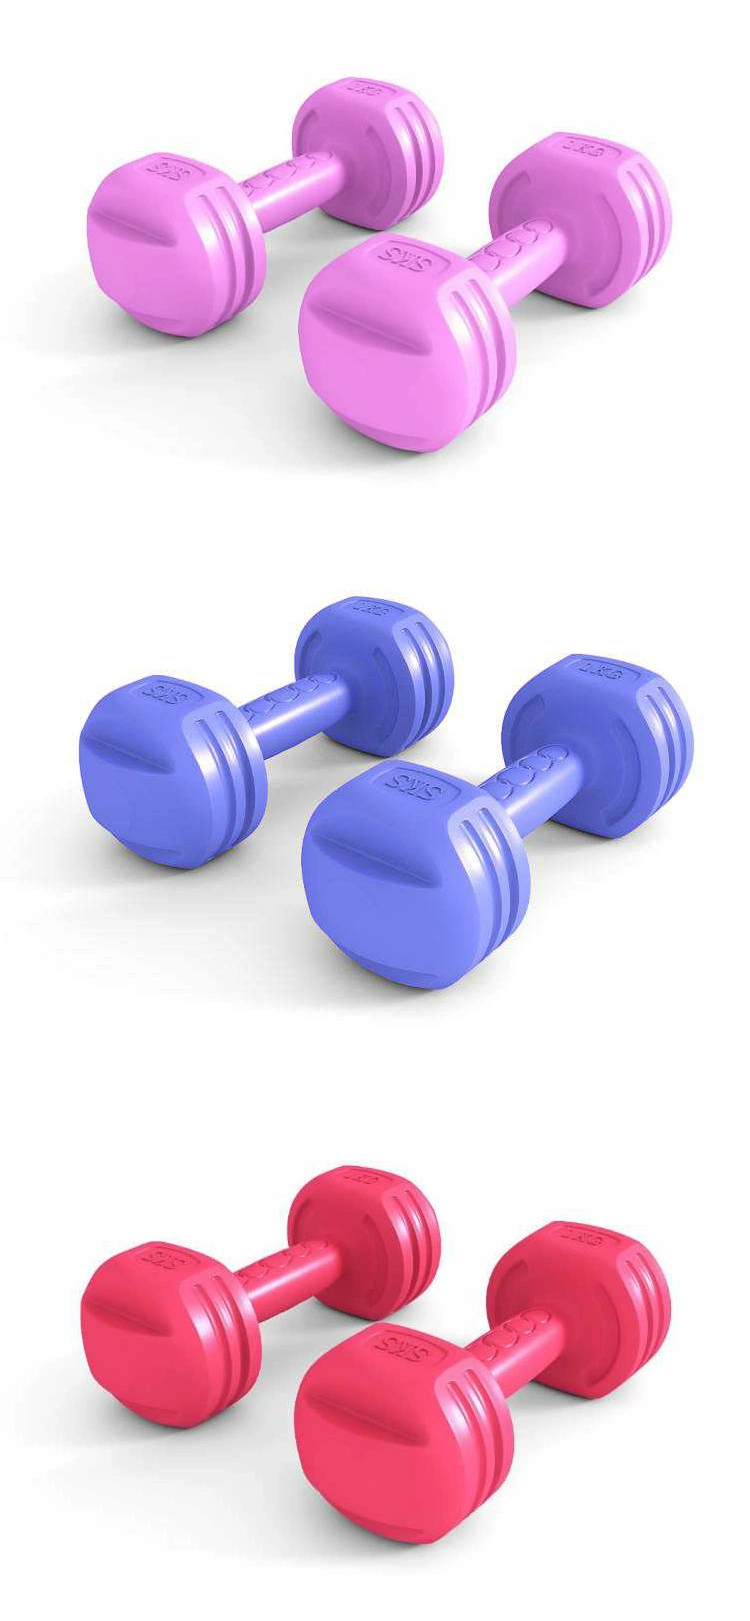 Fitness Equipment Home Gym Small Dumbbell Set for Body Building